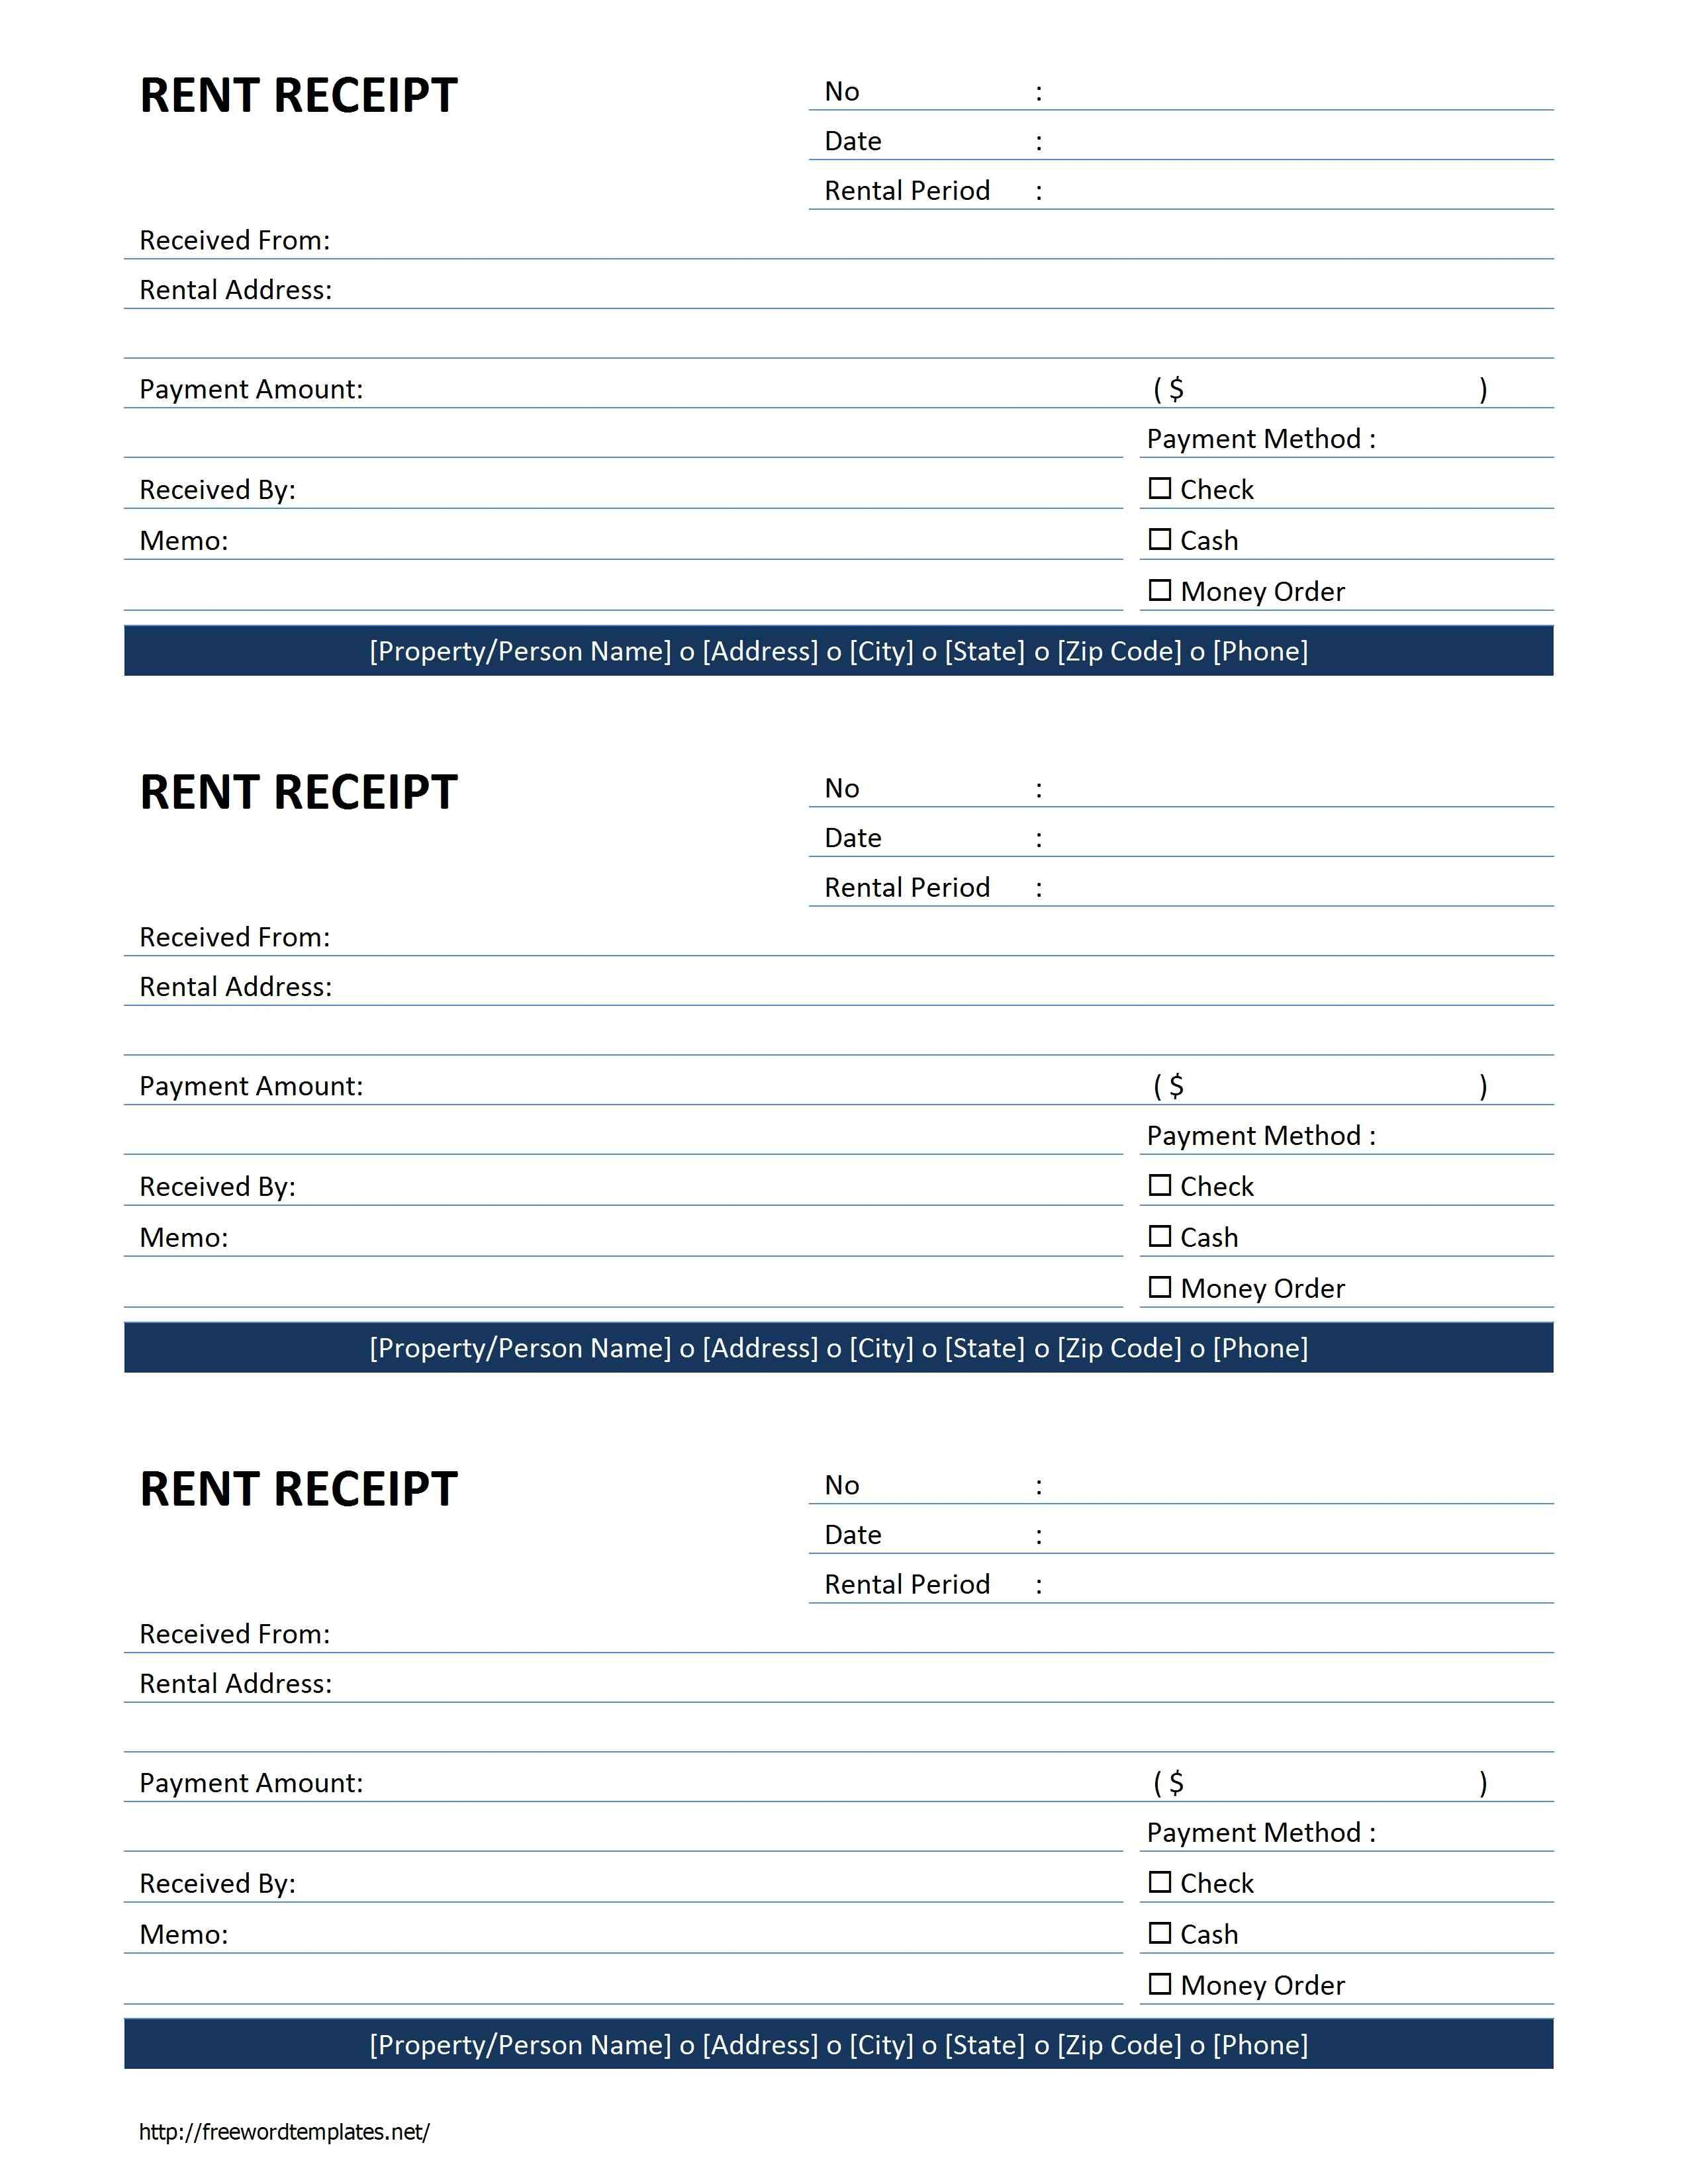 Rent Receipt Template | Free Microsoft Word Templates – Free Throughout Microsoft Office Word Invoice Template